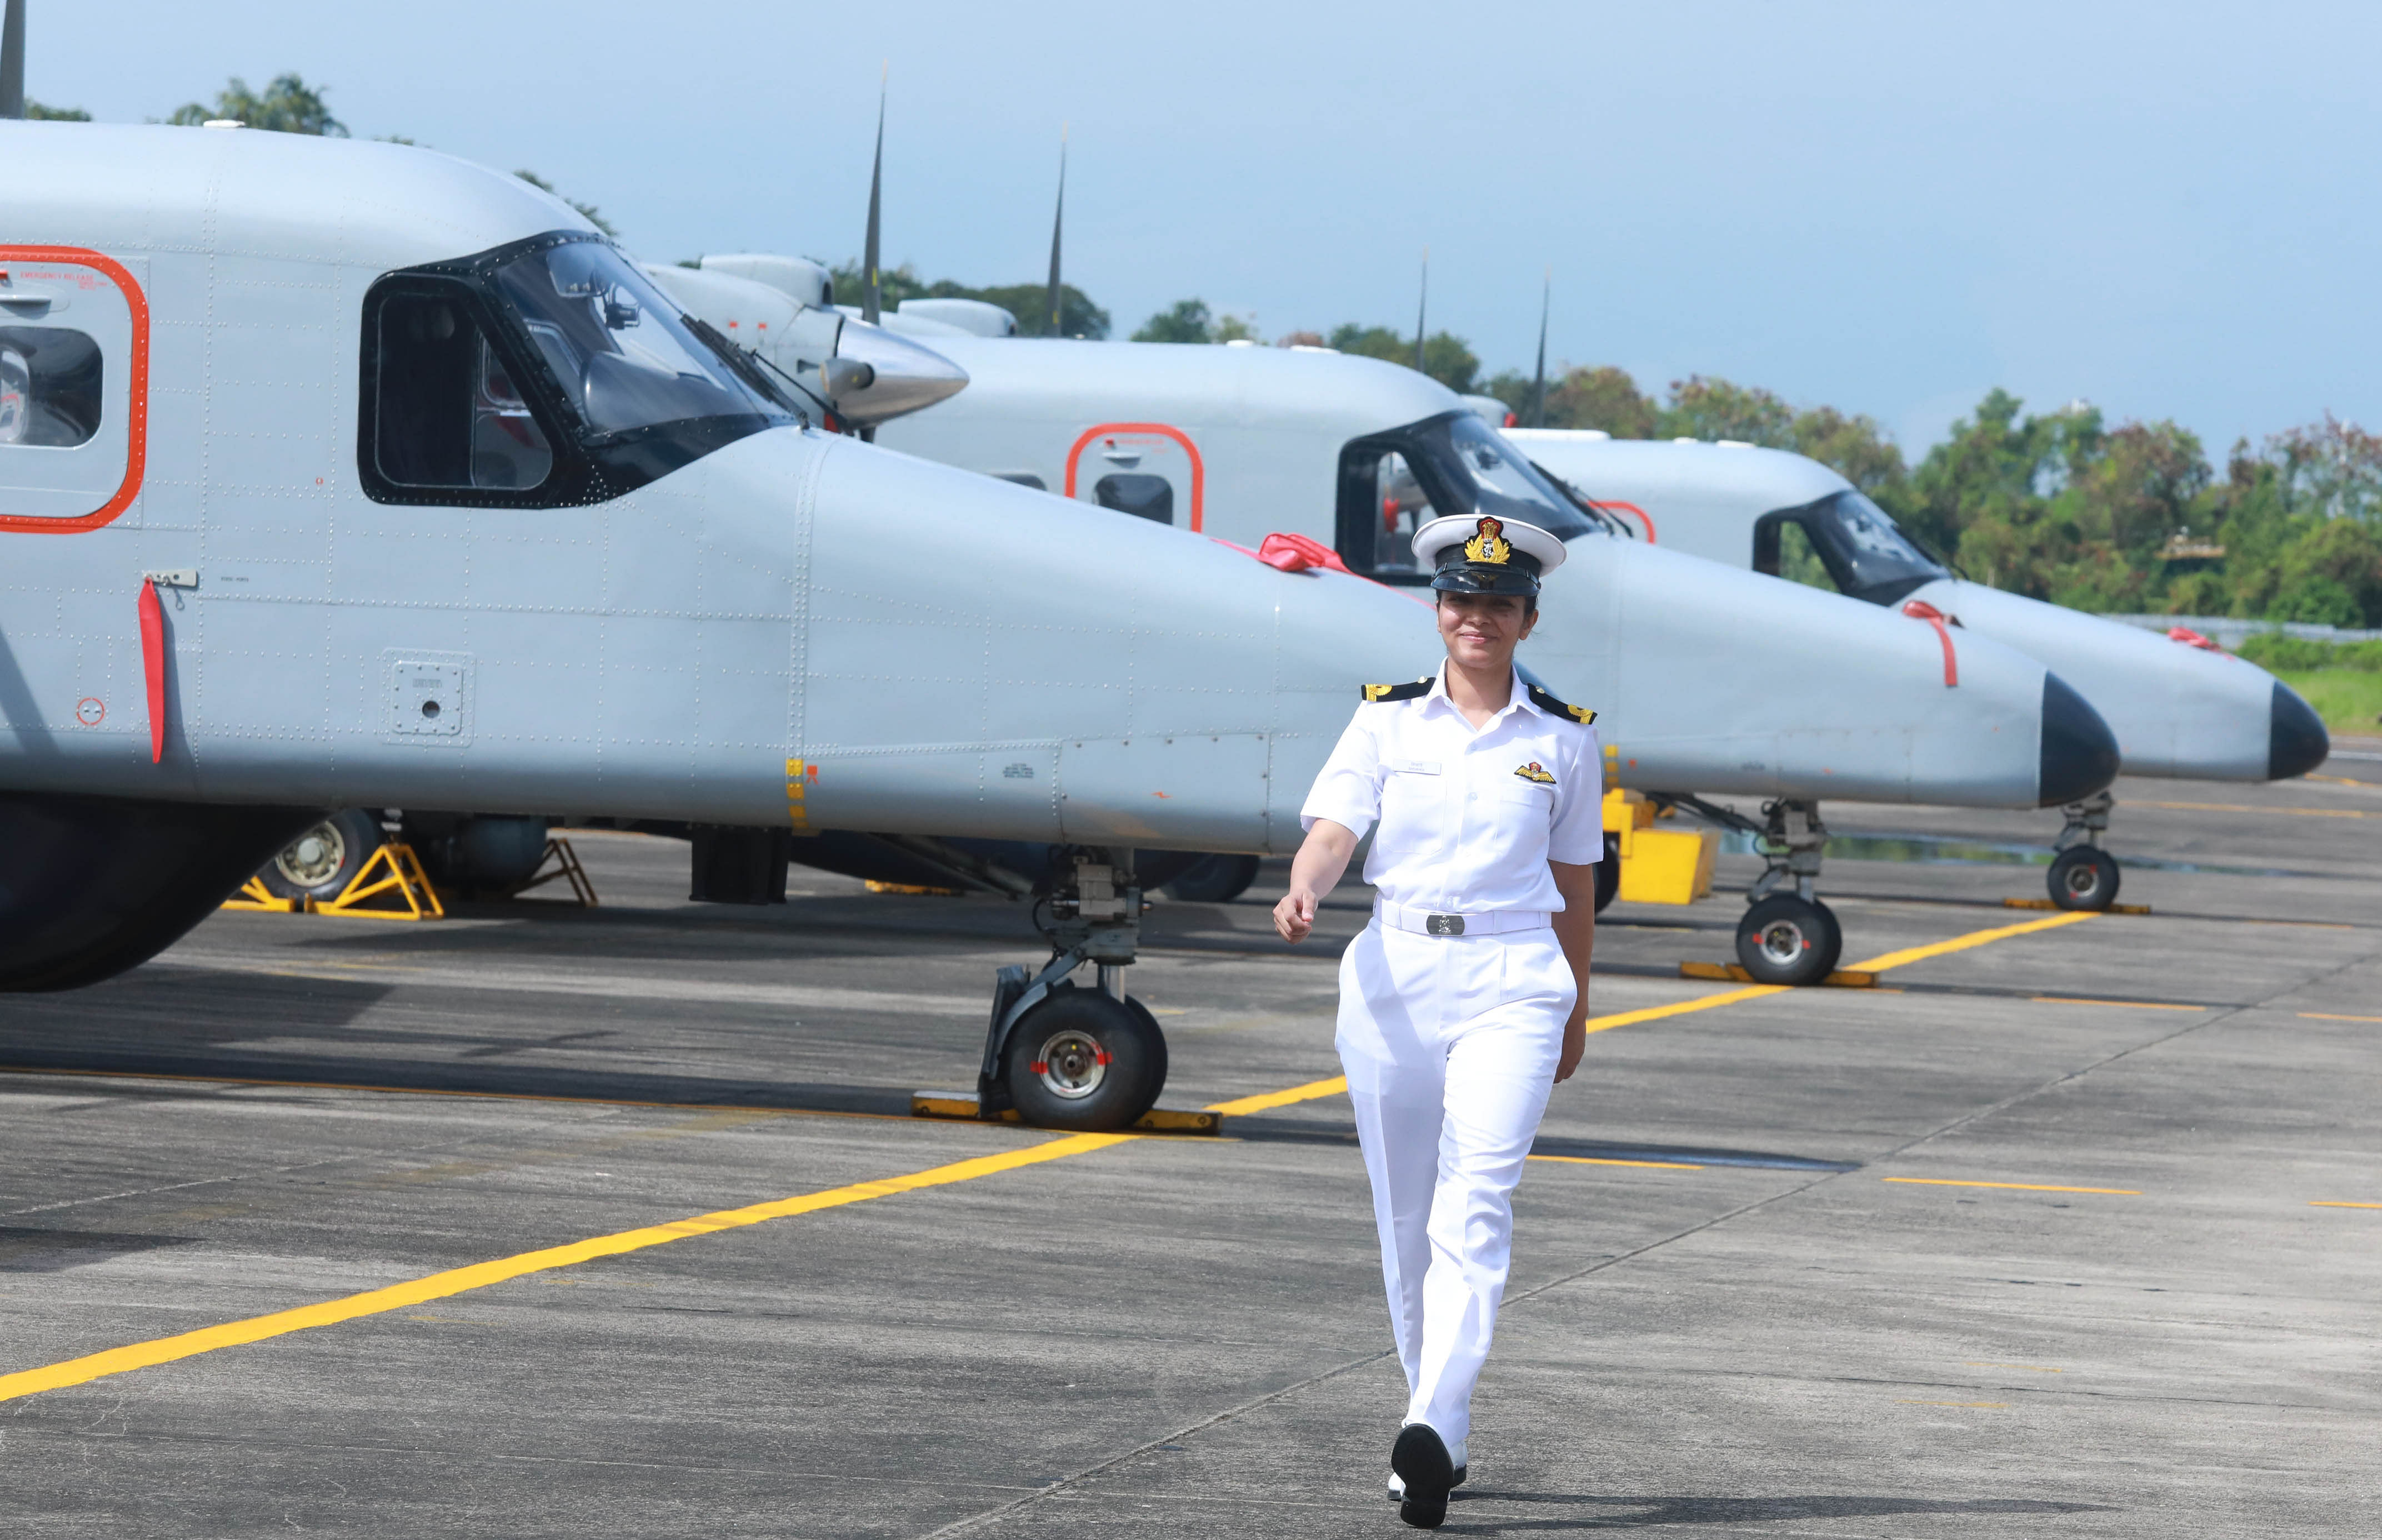 Shivangi, first woman pilot, at Southern Naval Command in Kochi after receiving the wings.